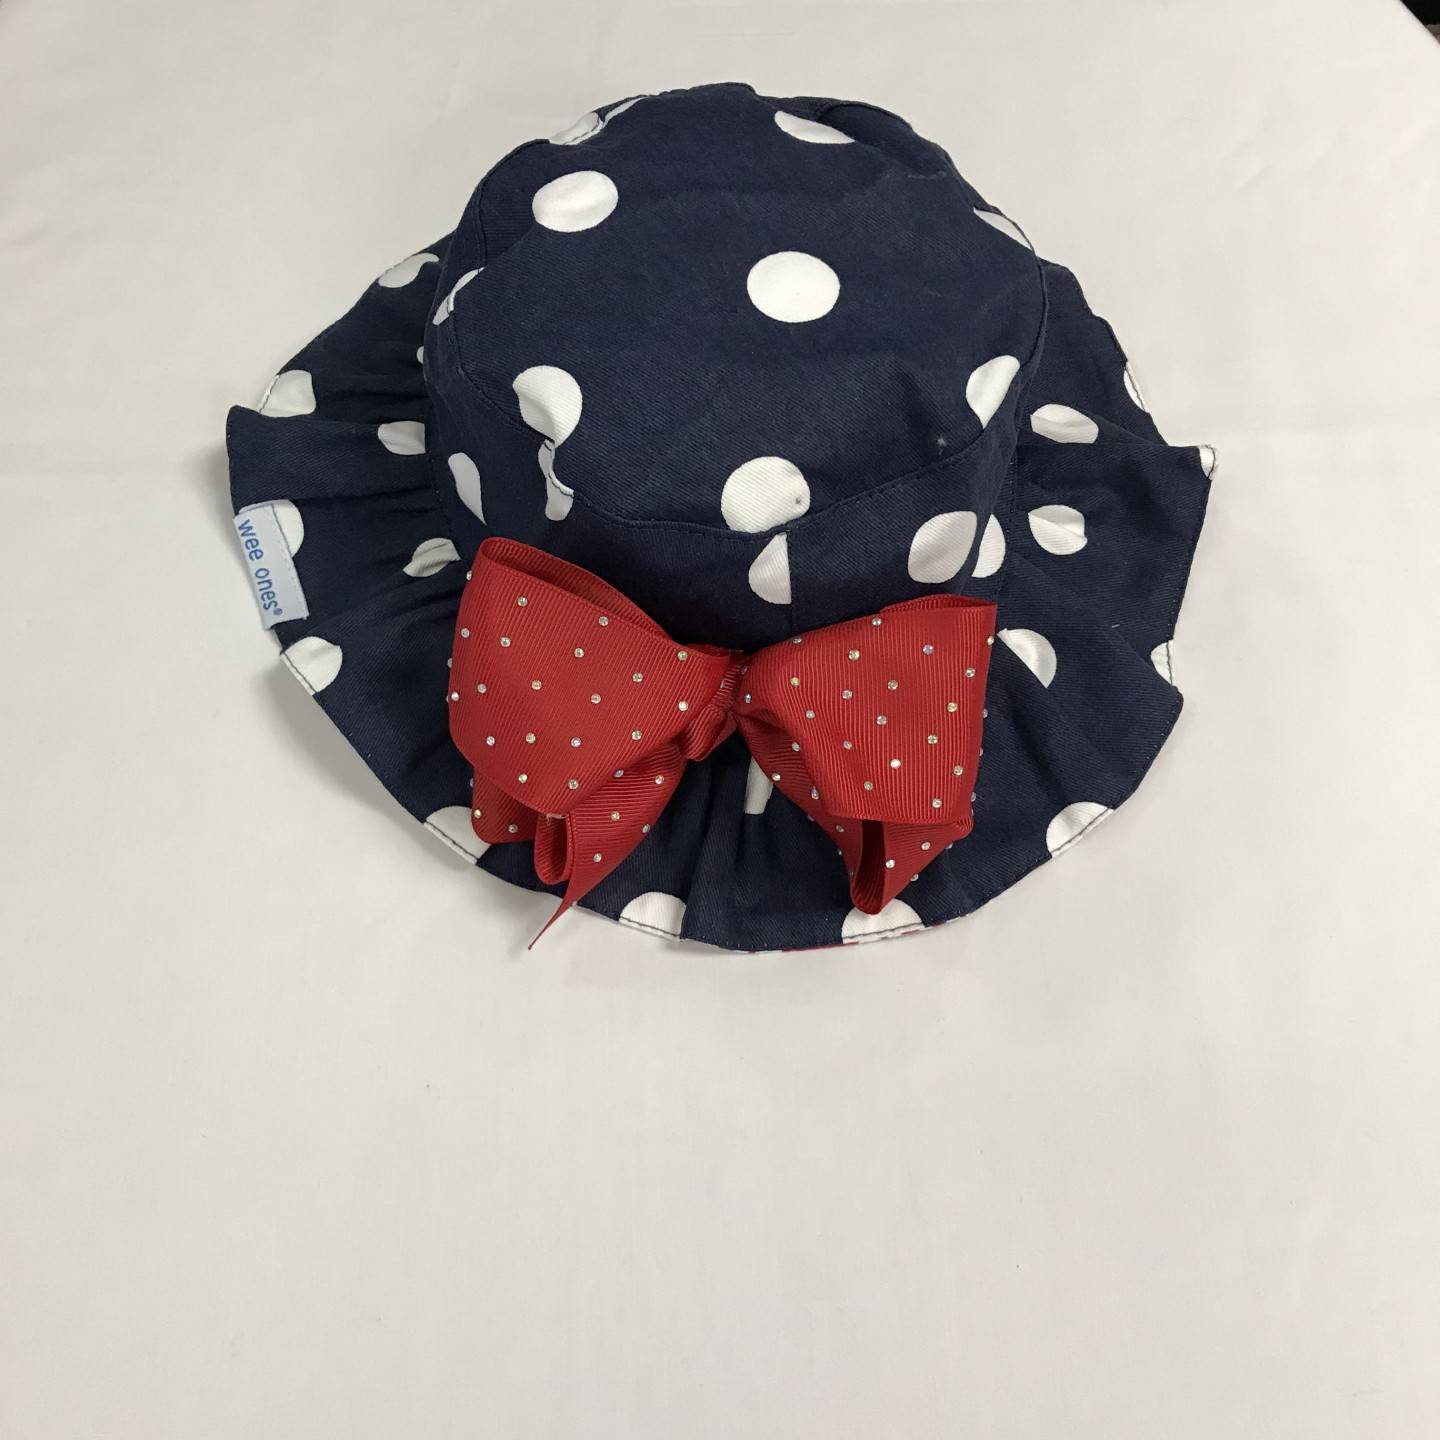 WEE ONES REVERSIBLE NAVY POLKA DOT SUN HAT SIZE 12-18 MONTHS